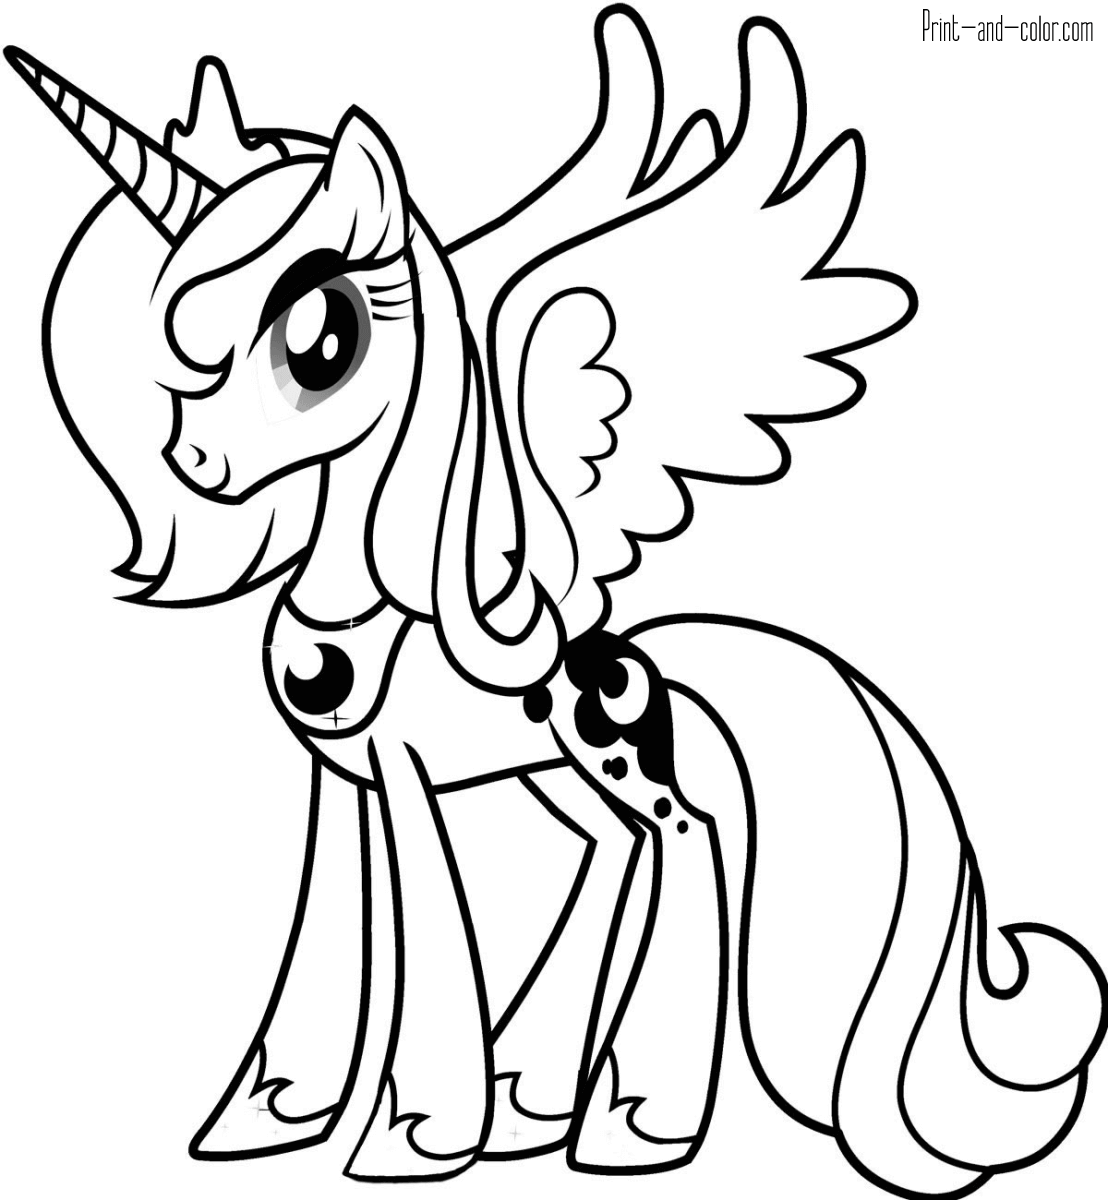 My Little Pony coloring pages | Print and Color.com